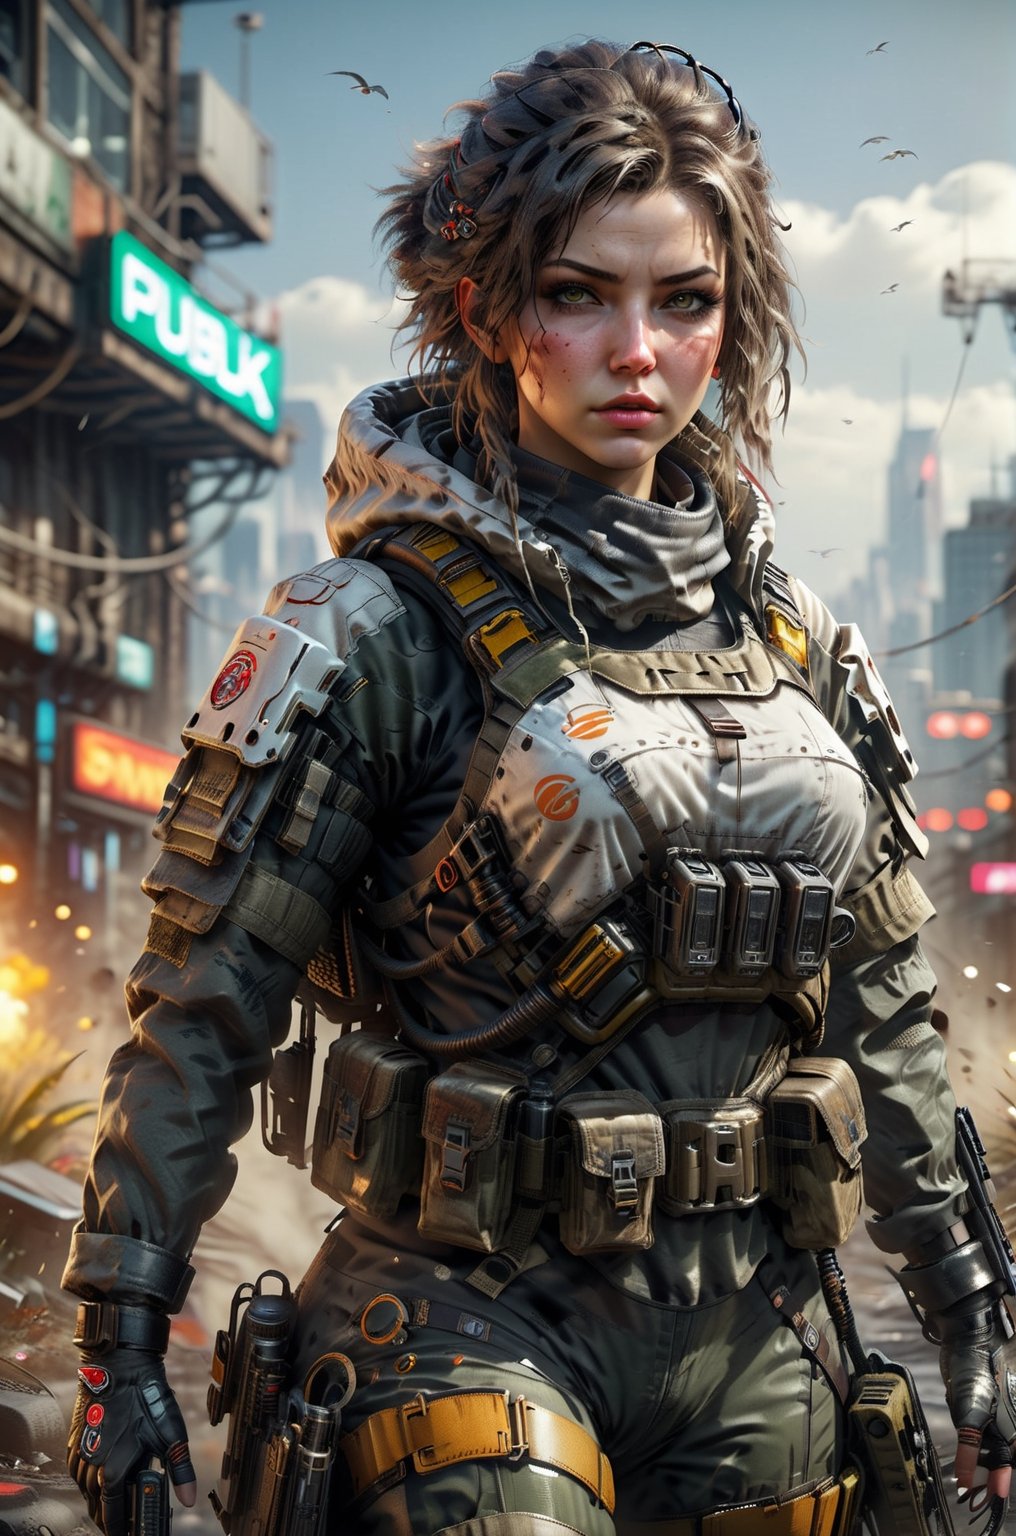 ((Best Quality)), ((Masterpiece)), (High Detail:1.3), 3d, machine gun in hand, beautiful (The cyberpunk:1.2) Special Forces, robort, woman with thick voluminous hair in (camouflaged_Uniform:1.1), bulletproof vest, Raincoat, digital (camouflaged: 1.3), HDR (High Dynamic Range), ray tracing, NVIDIA RTX, The ultra-Highres, Unreal 5, Subsurface scattering, PBR Texturing, Post-Processing, Anisotropic Filtering, Depth of field, Maximum Sharpness and Sharpness, multi-layered texture, albedo and reflection maps, Surface Shading, accurate simulation of the interaction of light and material, ideal proportions, Octane rendering, two-color lighting, Wide Aperture, low ISO, white balance, rule of thirds, 8K Raw, Effective subpixel, subpixel convolution,arcane,stalker